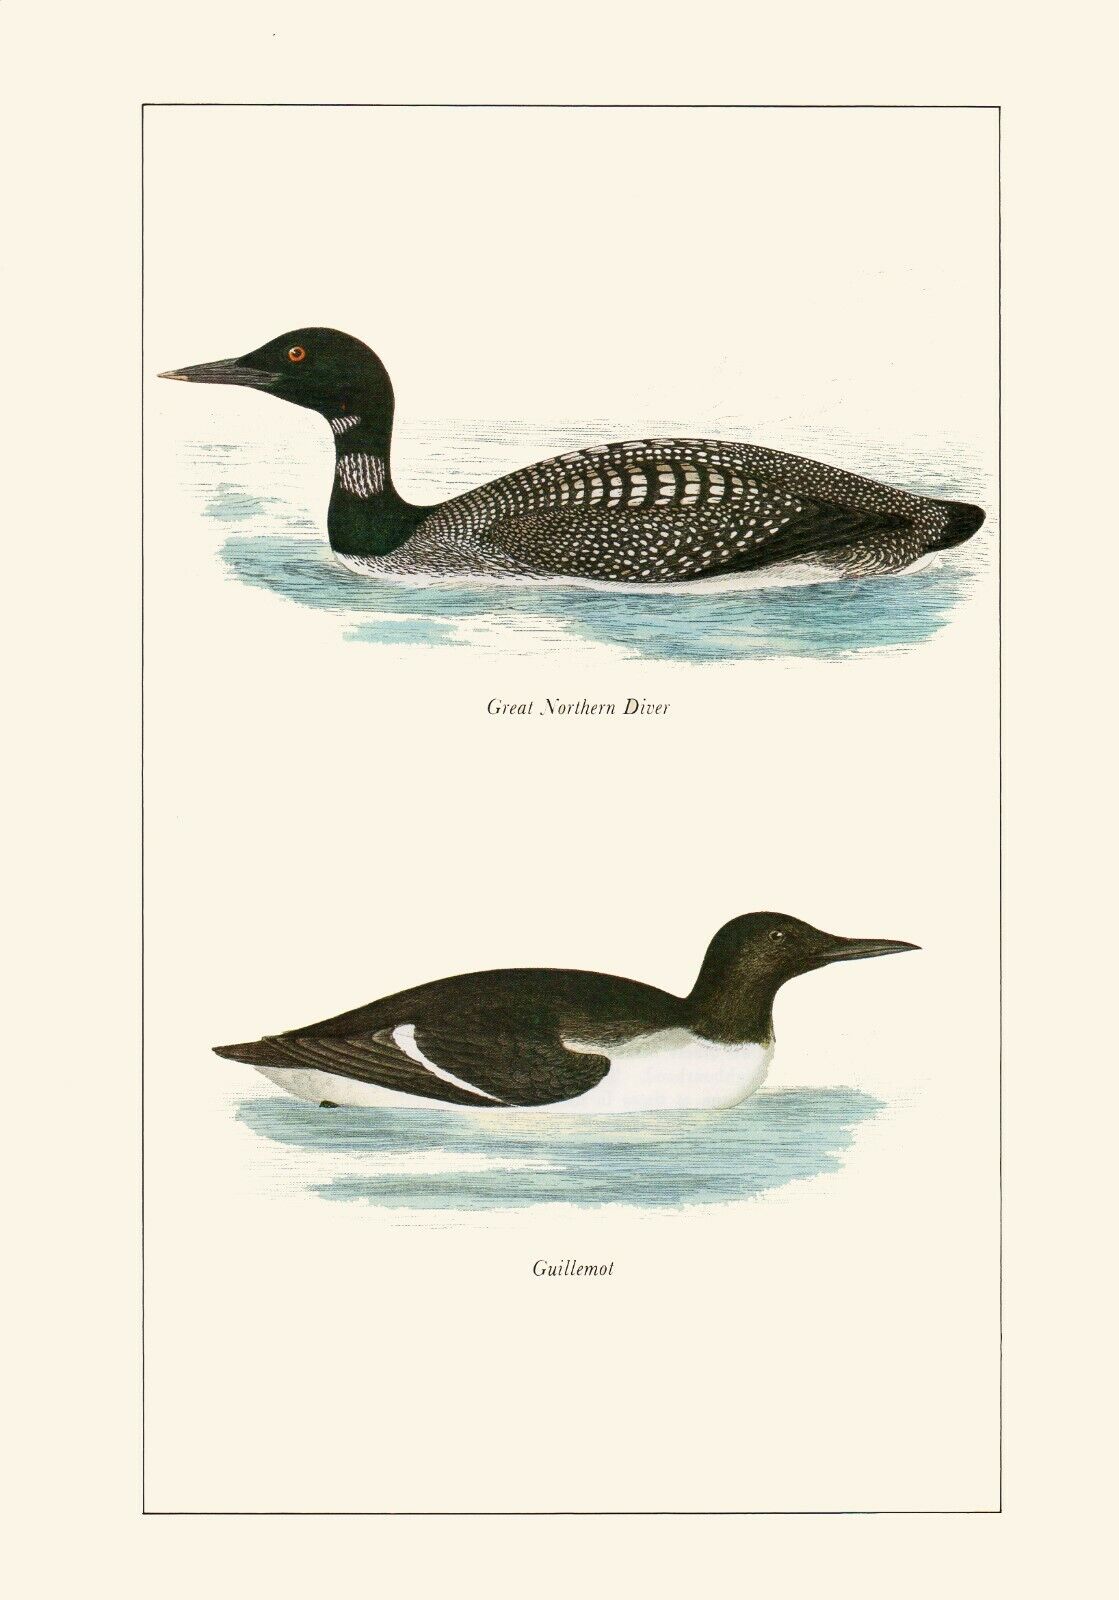 Great Northern Diver & Guillrmot 1981 Beautiful Vintage Bird Print by A.F.Lydon